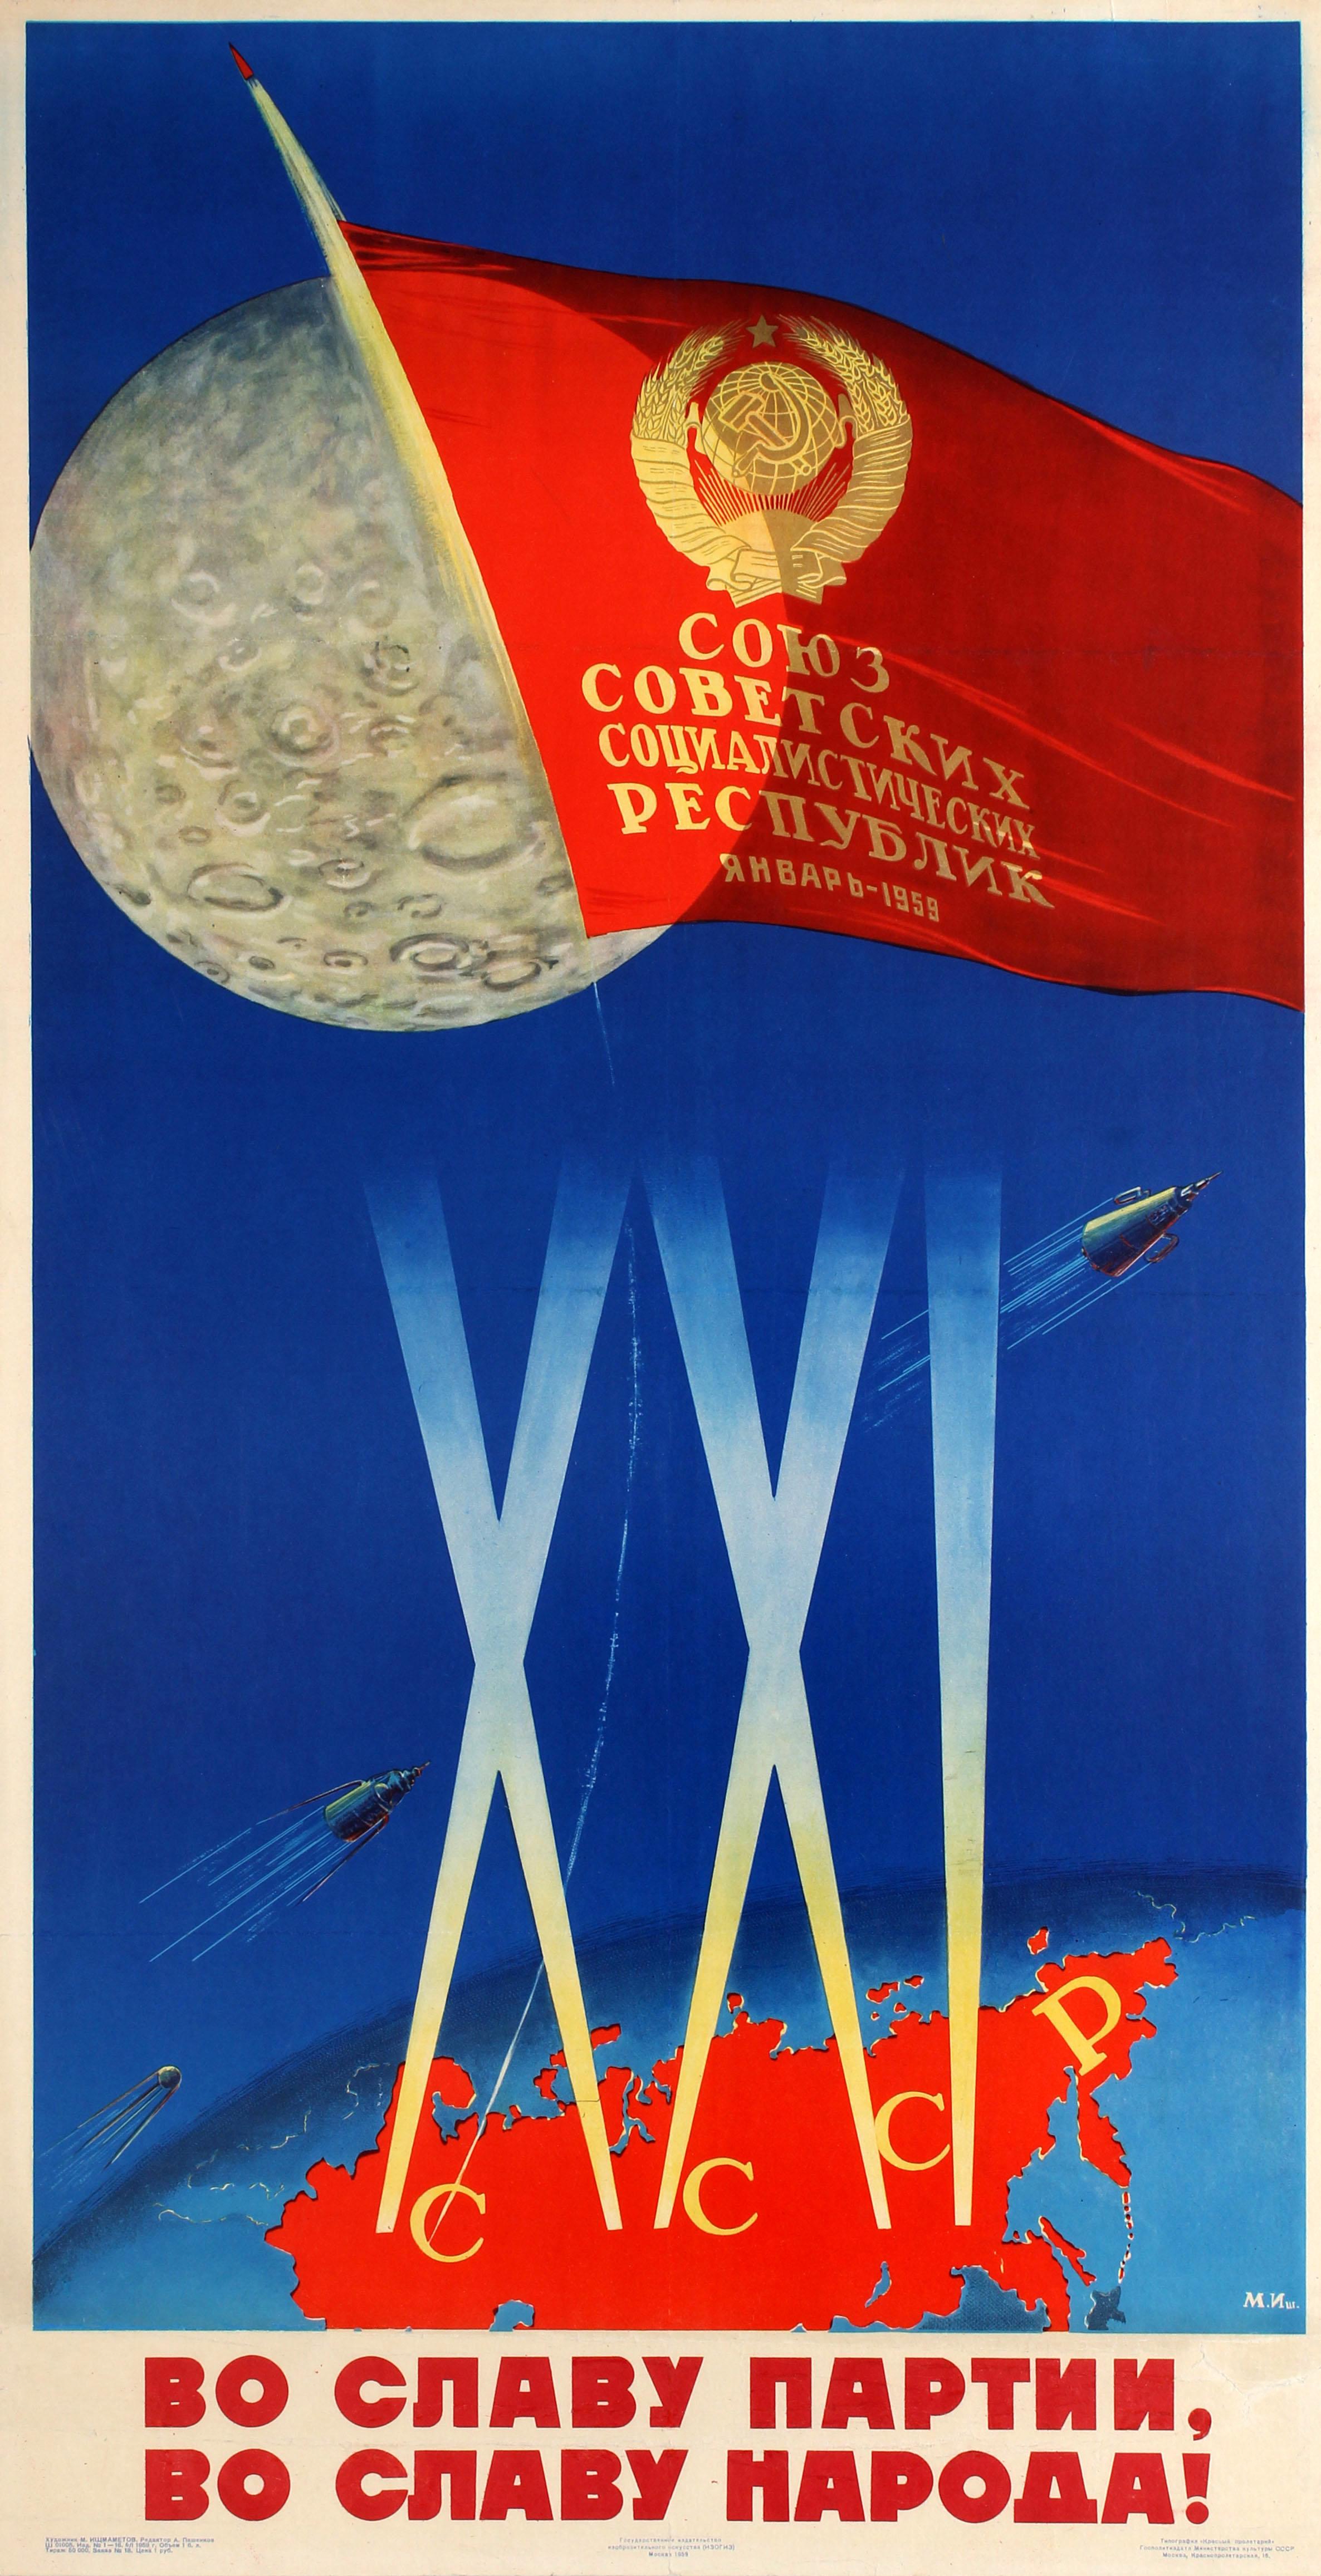 M. Ishmametov Print - Original Vintage Soviet Propaganda Space Poster - USSR In The Glory Of The Party